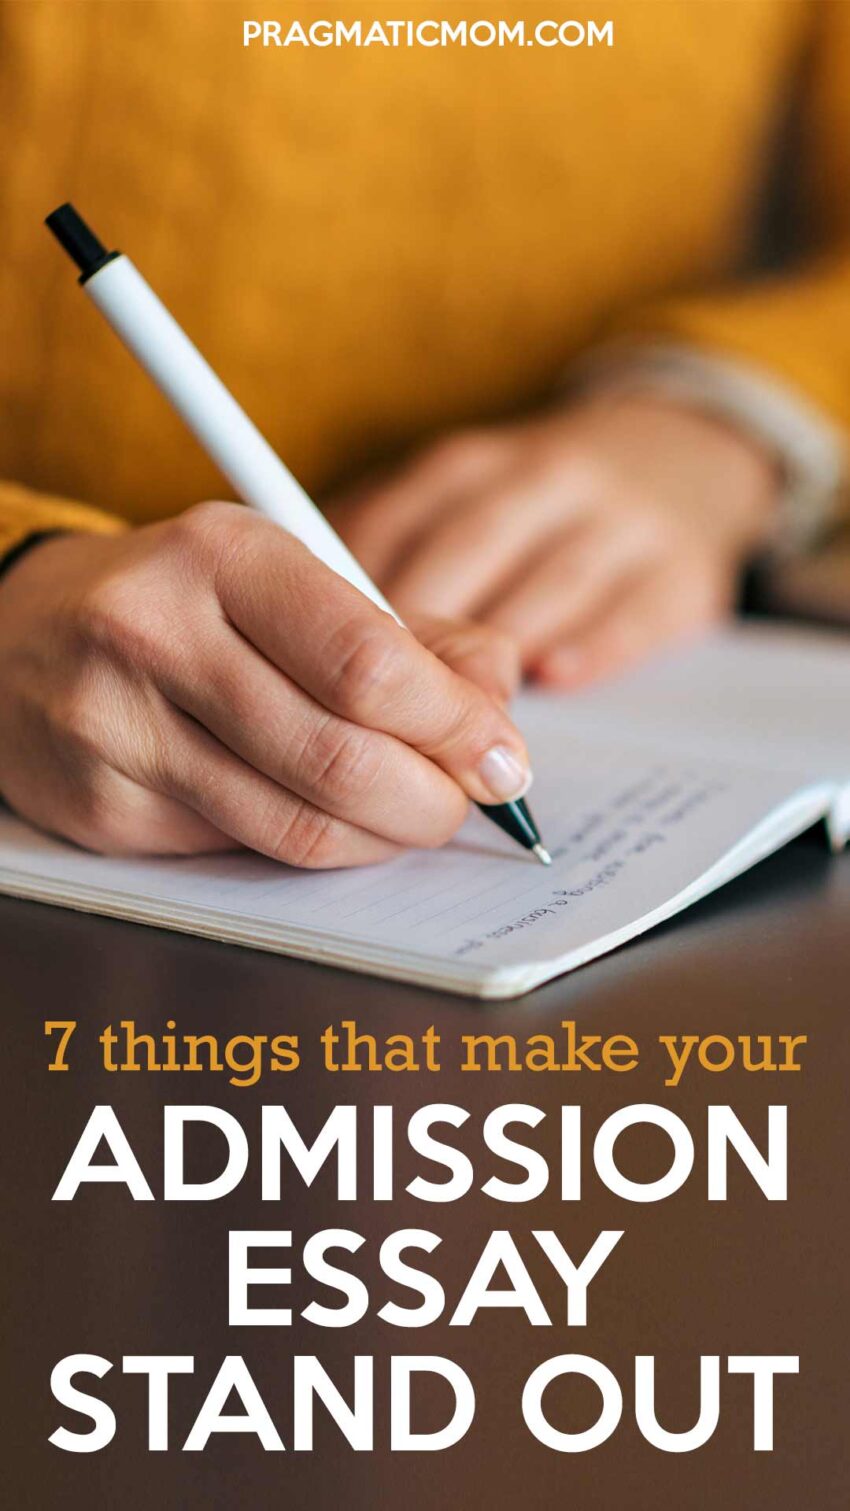 7 Things that Make Your Admission Essay Stand Out